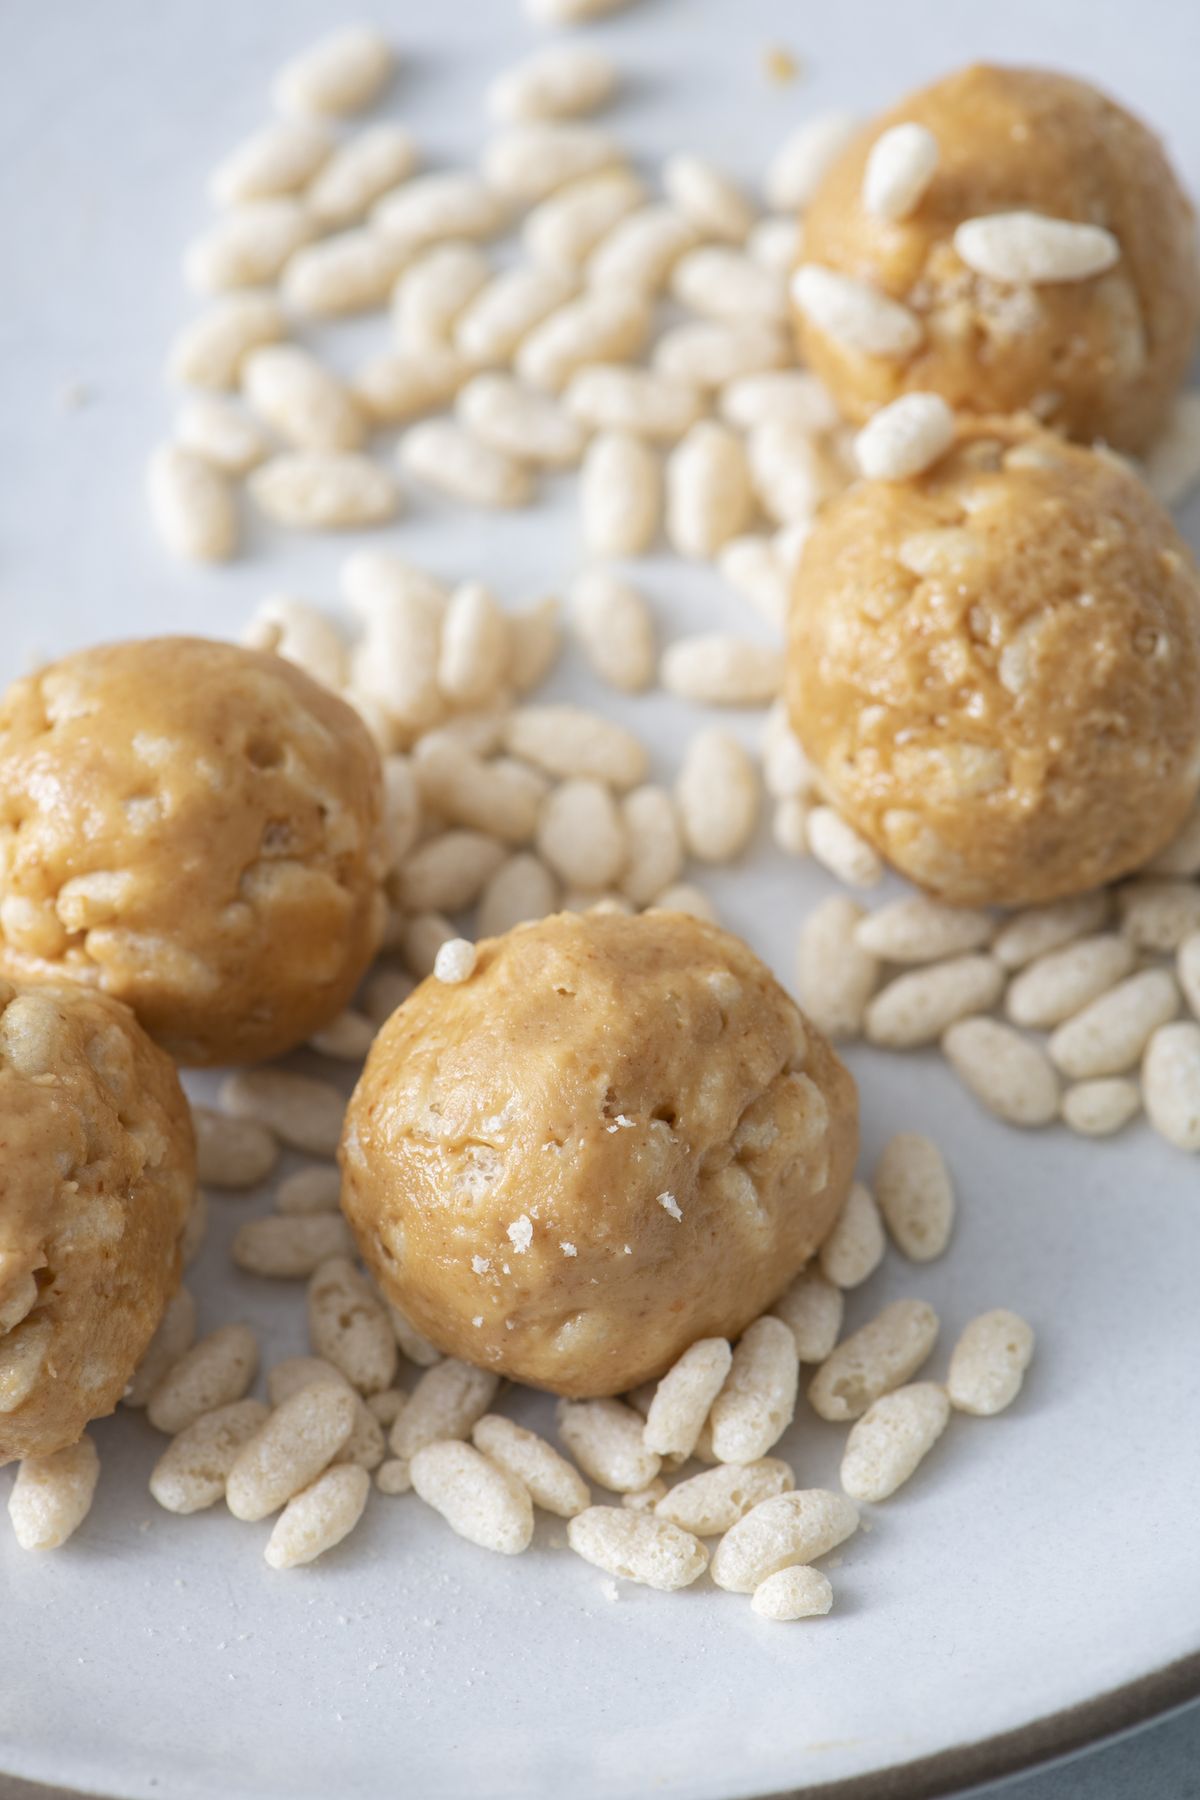 peanut butter rice crispy bites without chocolate